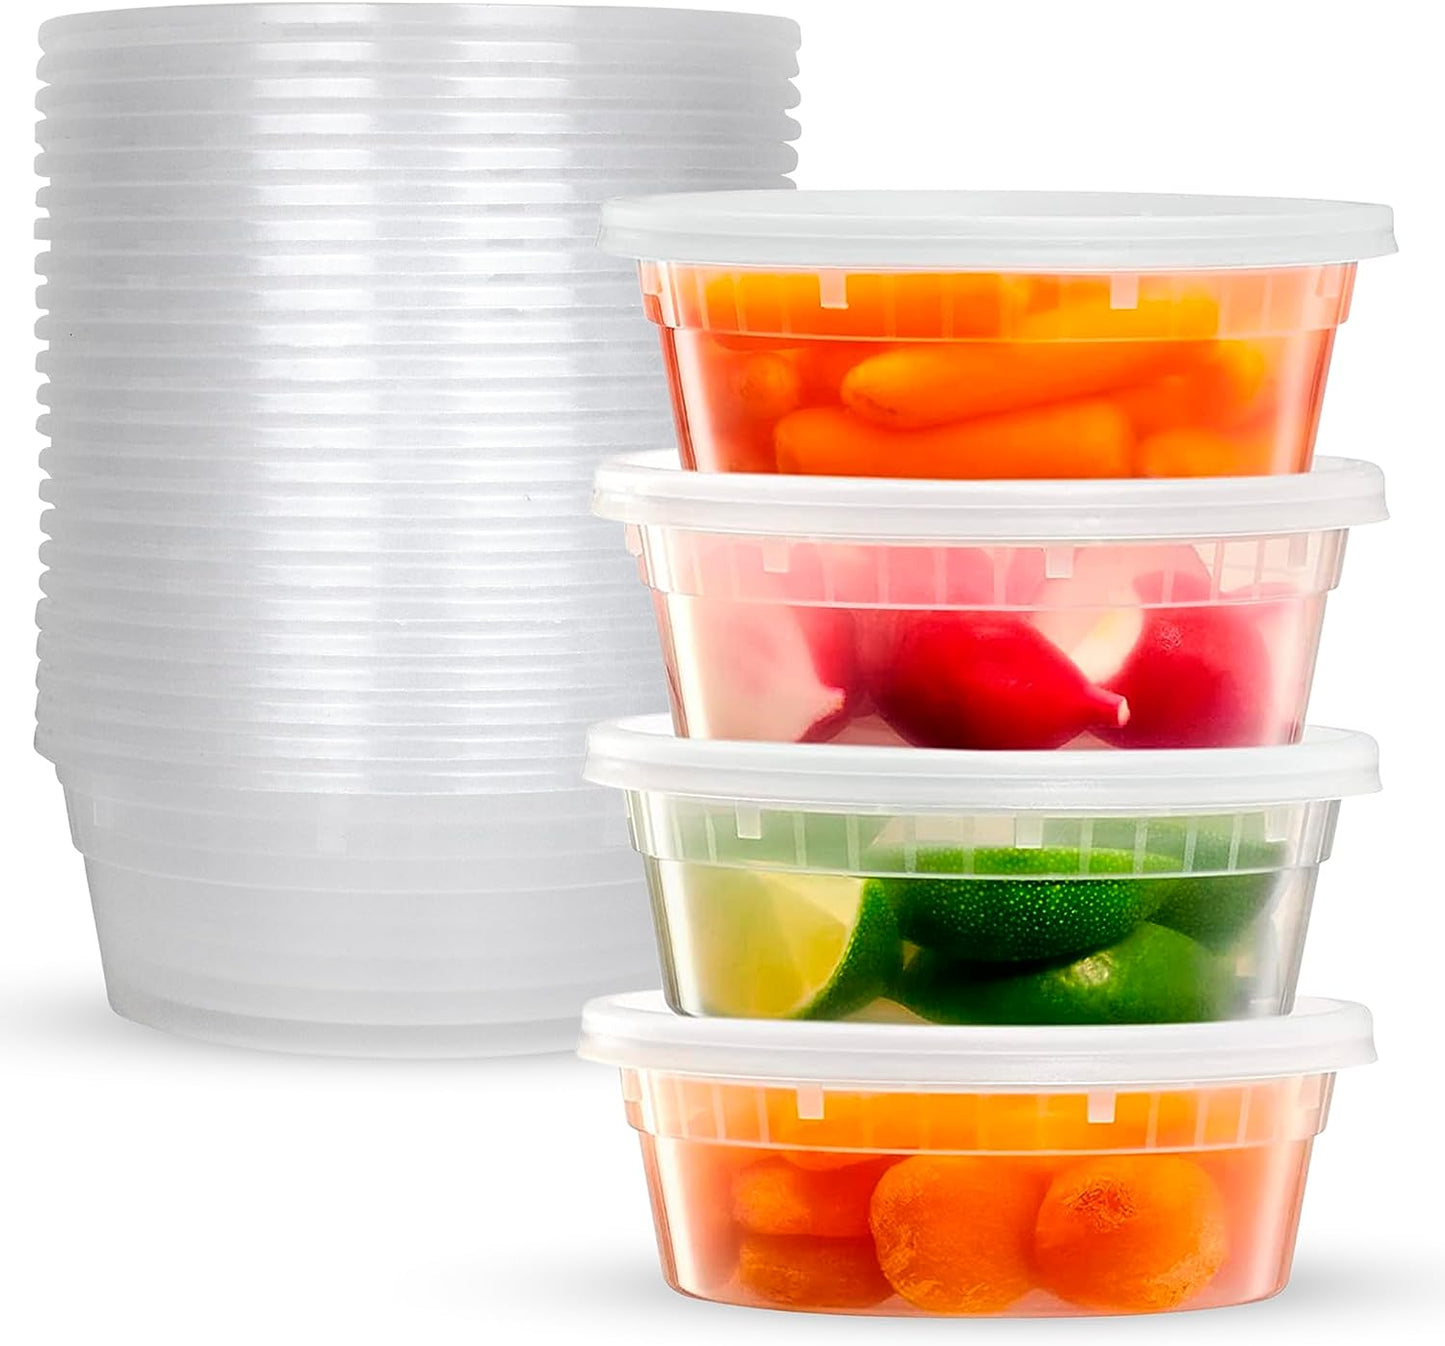 Supreme Select Deli Plastic Storage Containers with Lids - 24 Pack of 8 Oz Reusable Food Containers: Ideal for Home & Business Use, Microwavable, Freezer-Friendly, Dishwasher Safe, with Secure & Tight-Fitting Covers